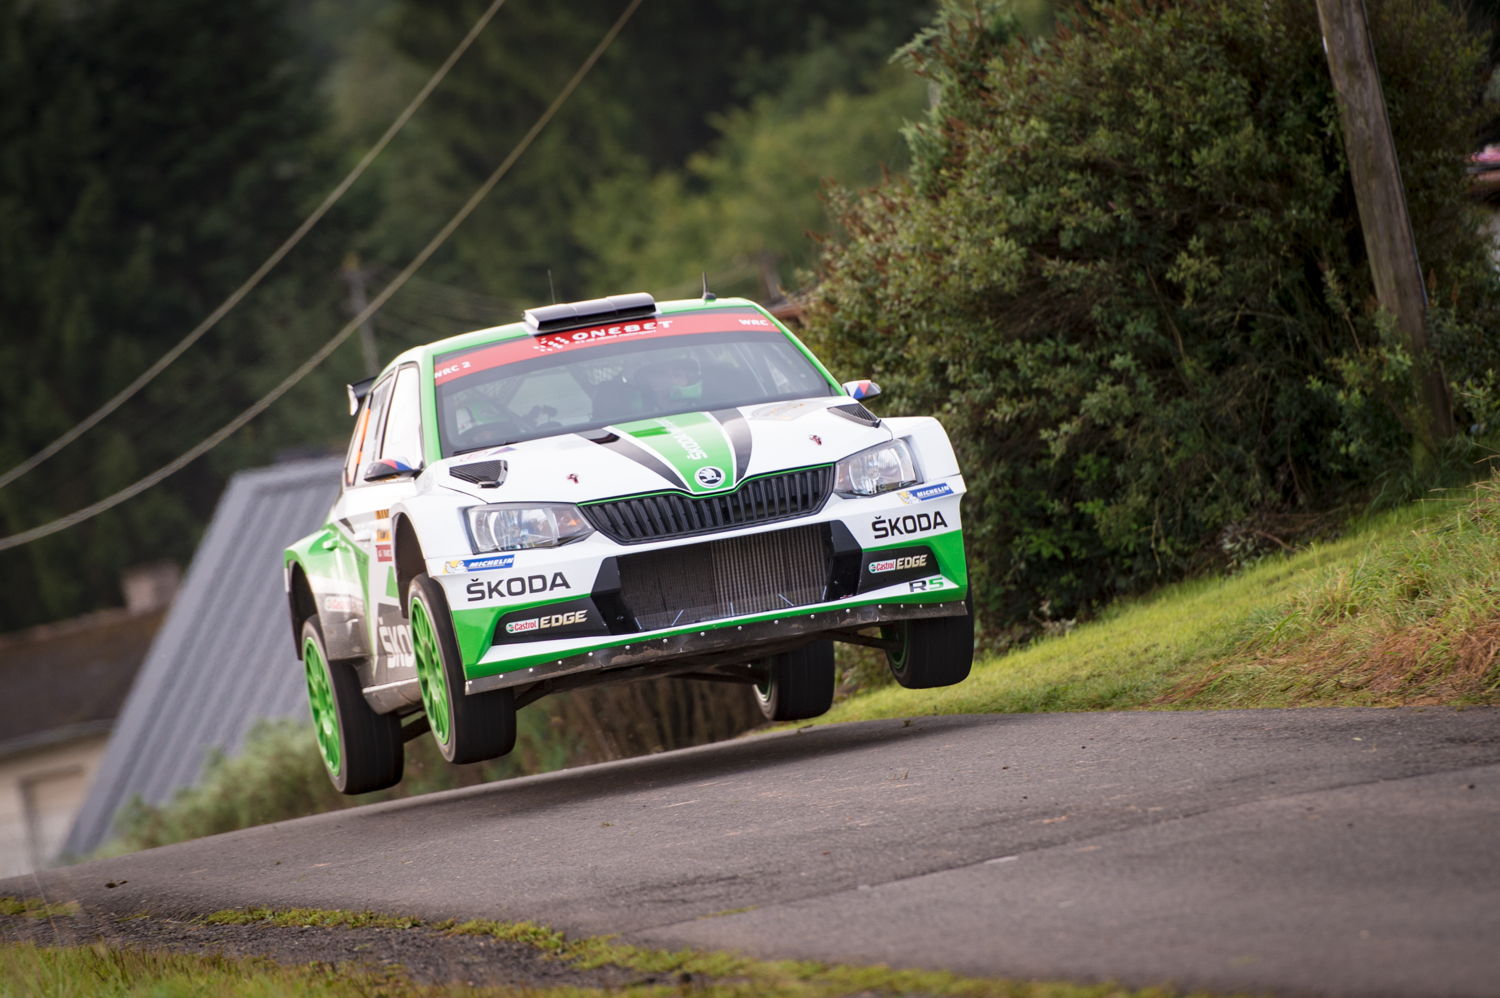 Jan Kopecký and co-driver Pavel Dresler (CZE/CZE) finished second in WRC 2 at ADAC Rallye Deutschland and helped ŠKODA Motorsport to win the Team Championship